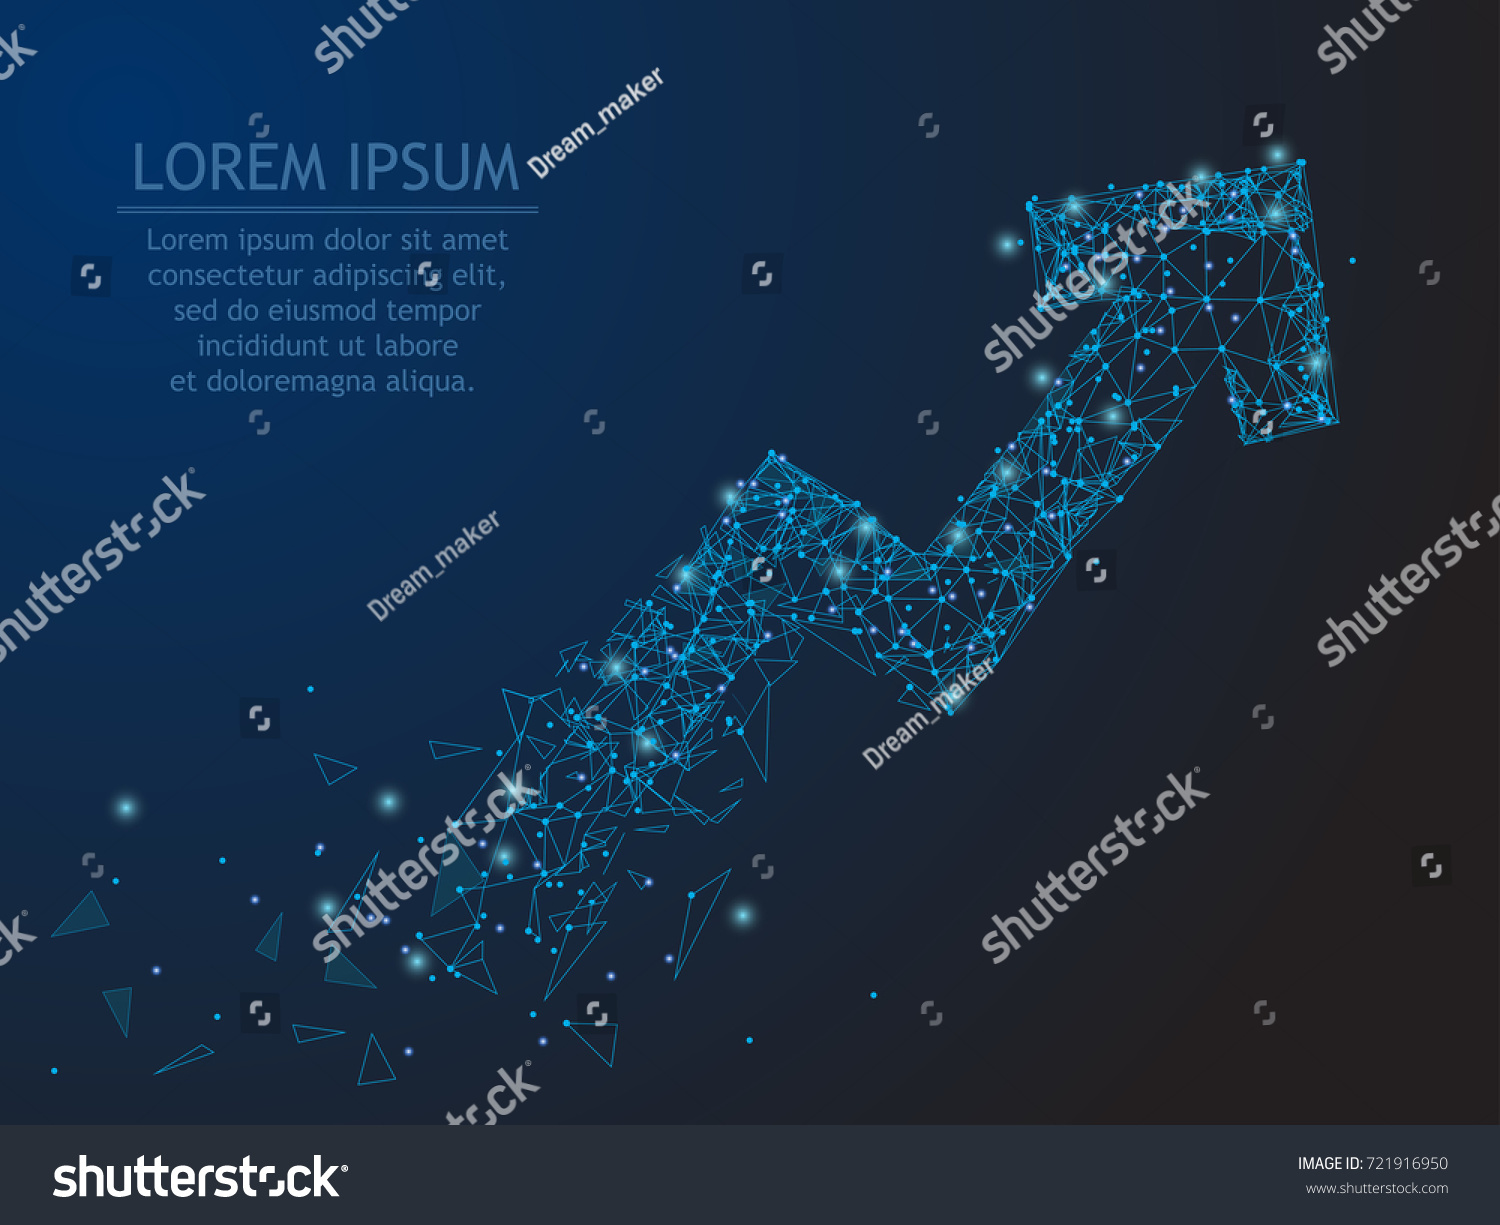 Polygonal wire frame low poly mash looks like constellation arrow growth with crumbled end on blue night sky. Business, finance, career or other grows concept illustration or background